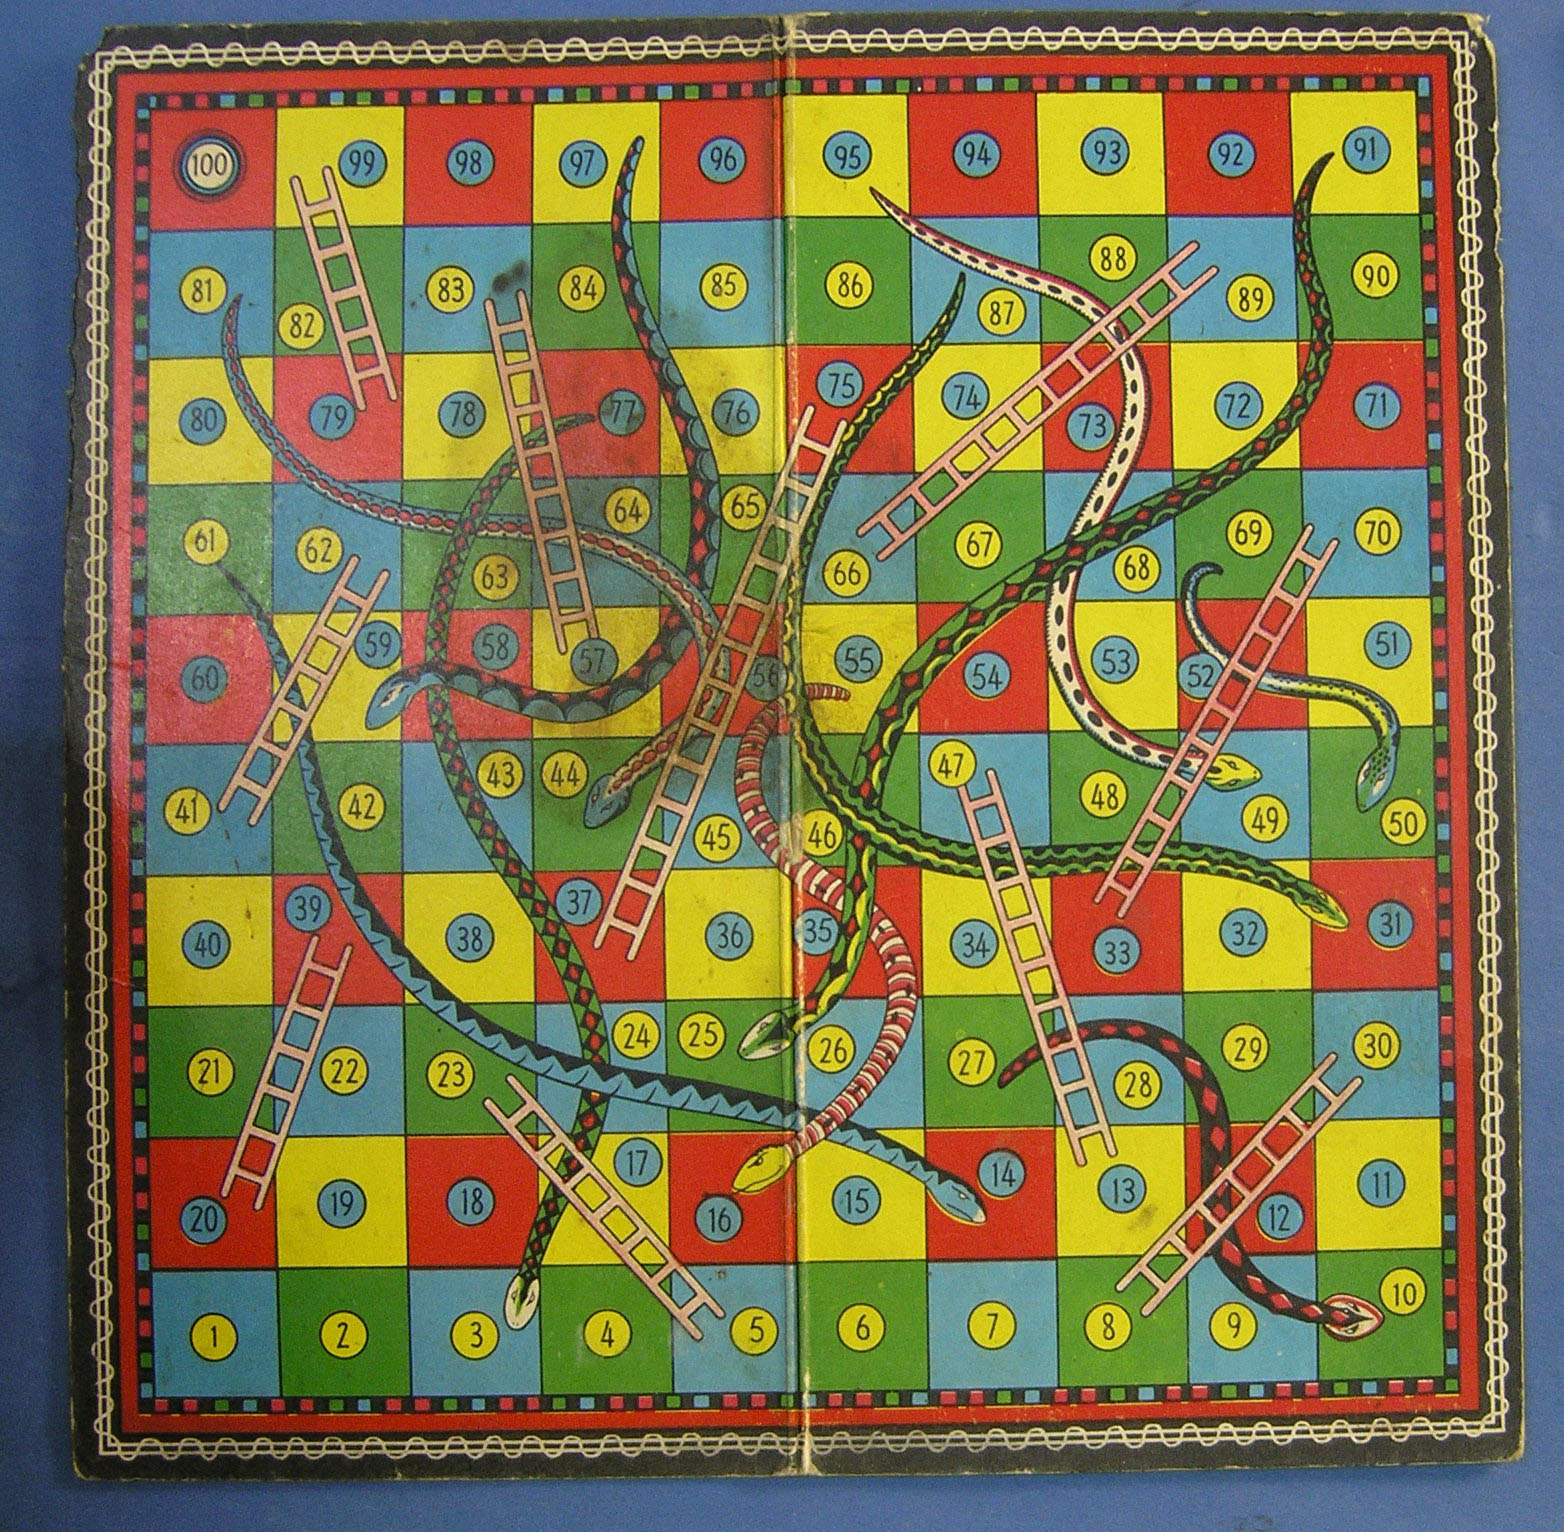 Snakes and ladders - Wikipedia